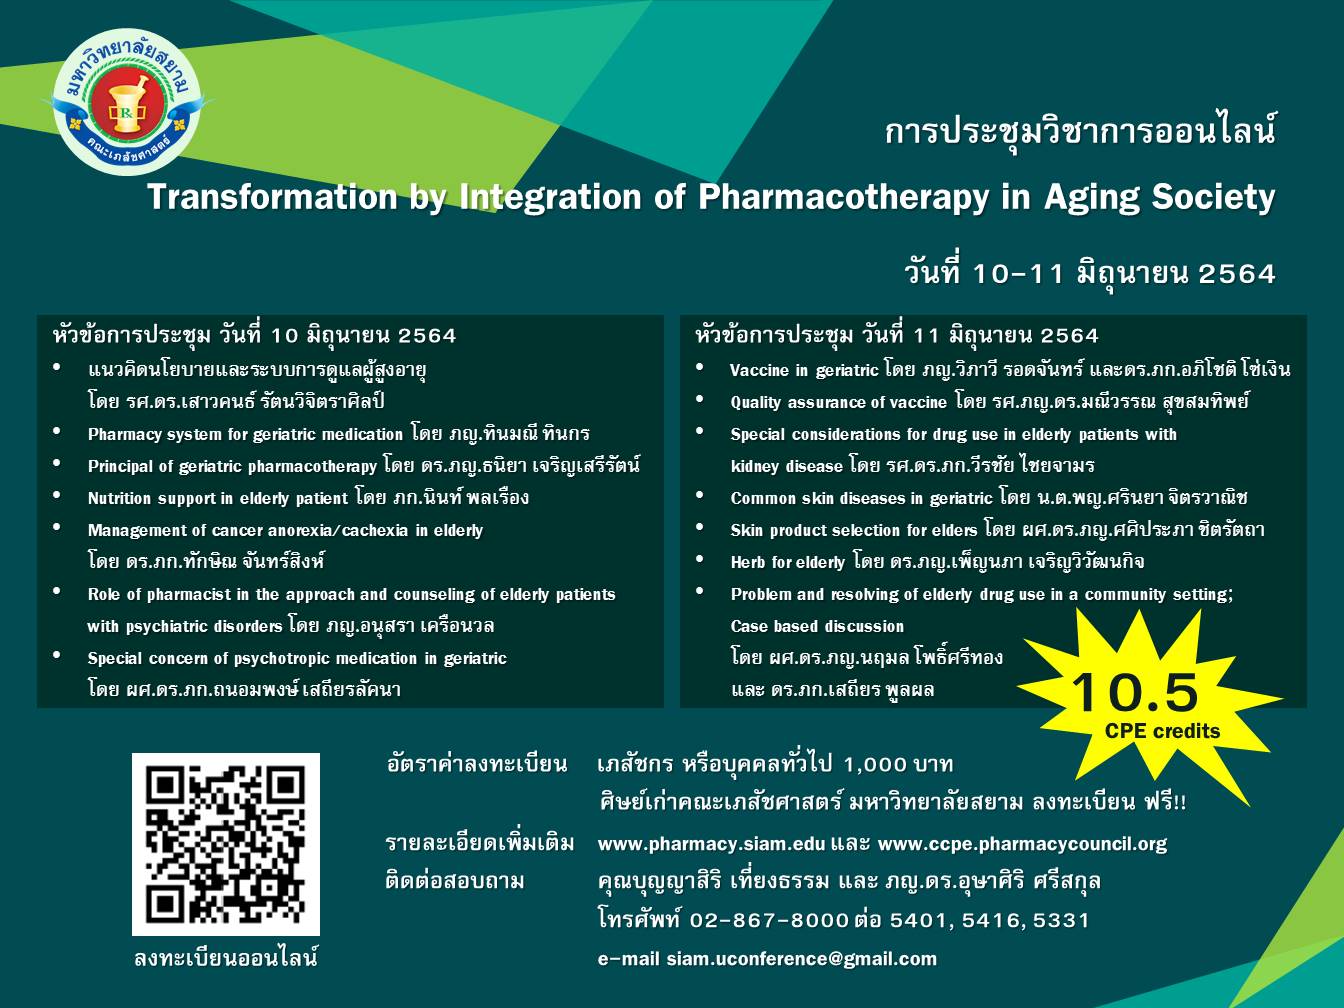 Transformation by Integration of Pharmacotherapy in Aging Society (TIPS)